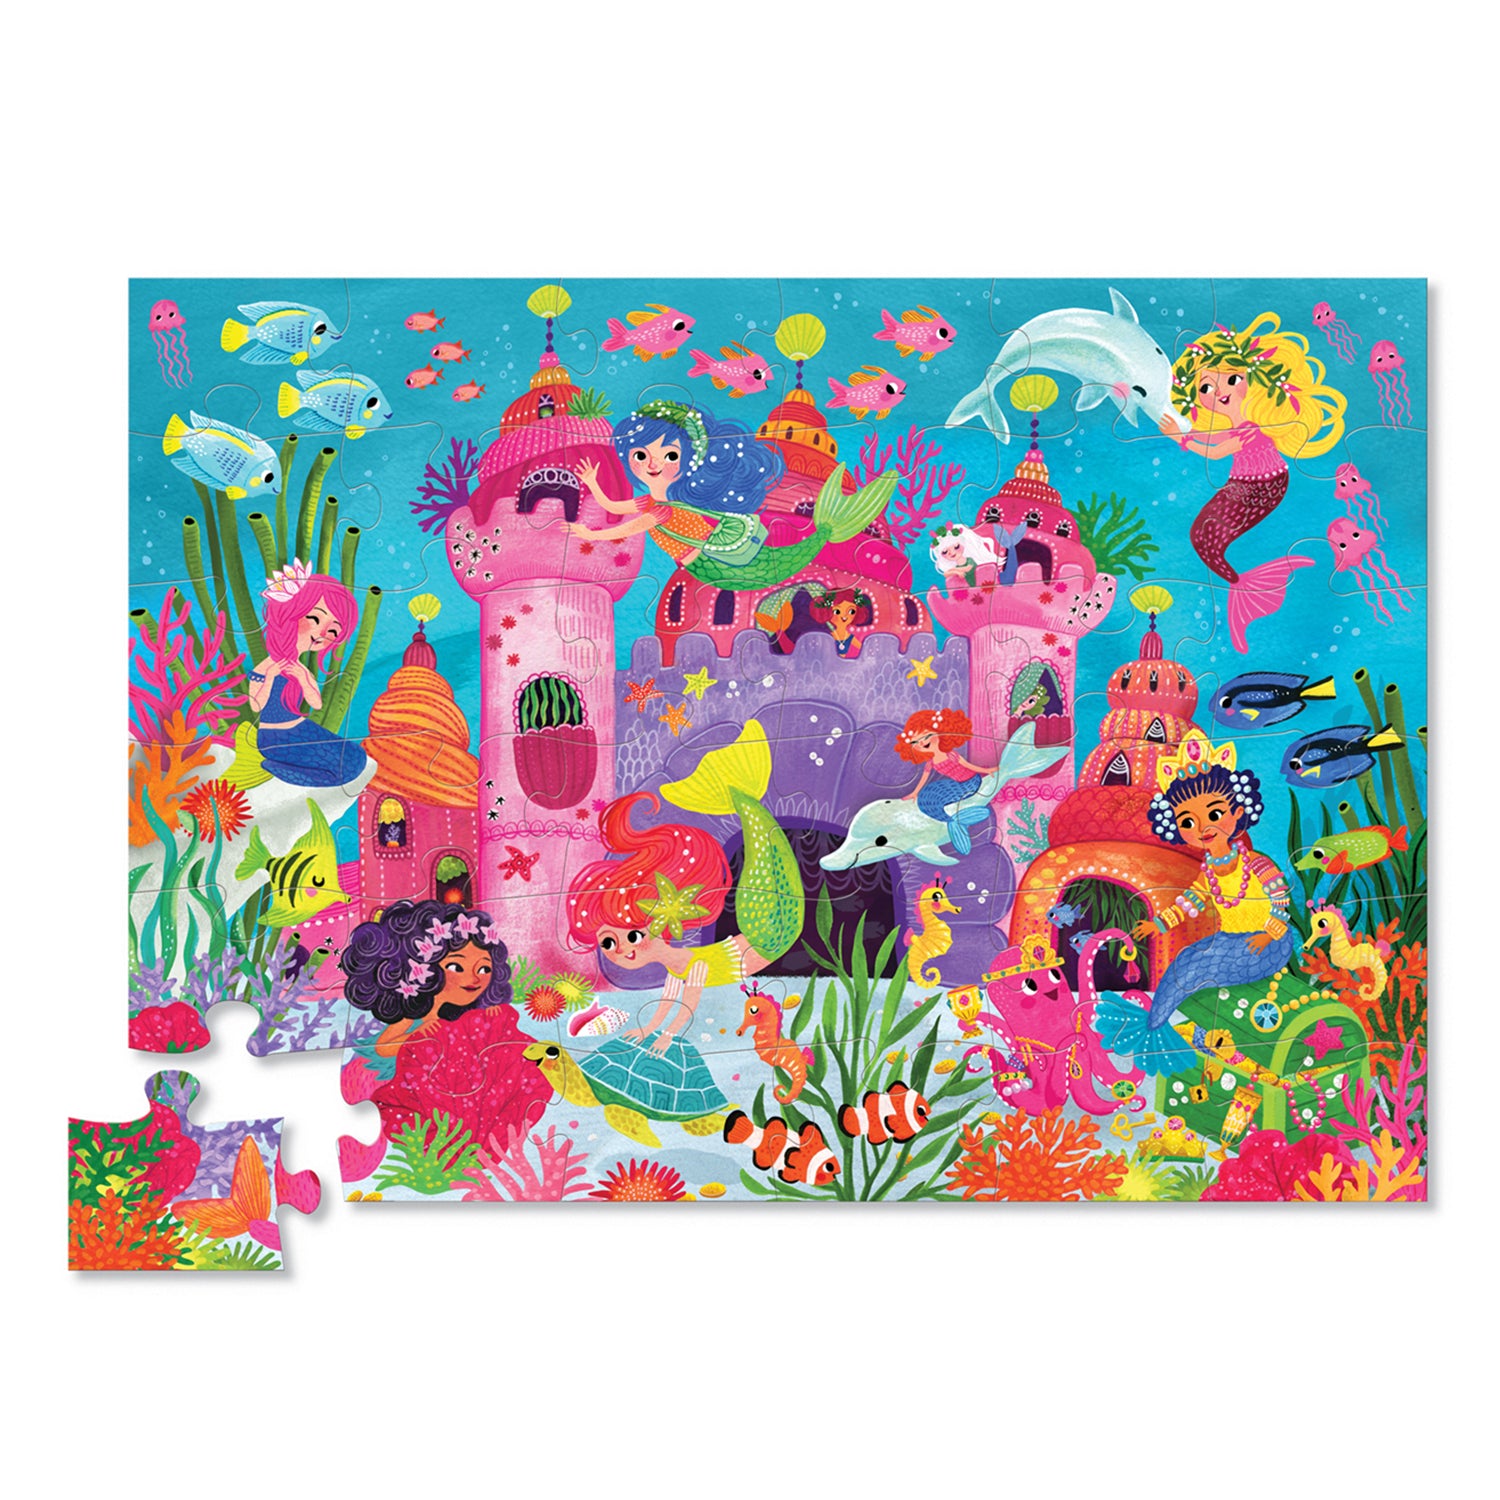 36 Piece Floor Puzzle - Mermaid Palace-36 Piece Puzzles-Second Snuggle Preloved